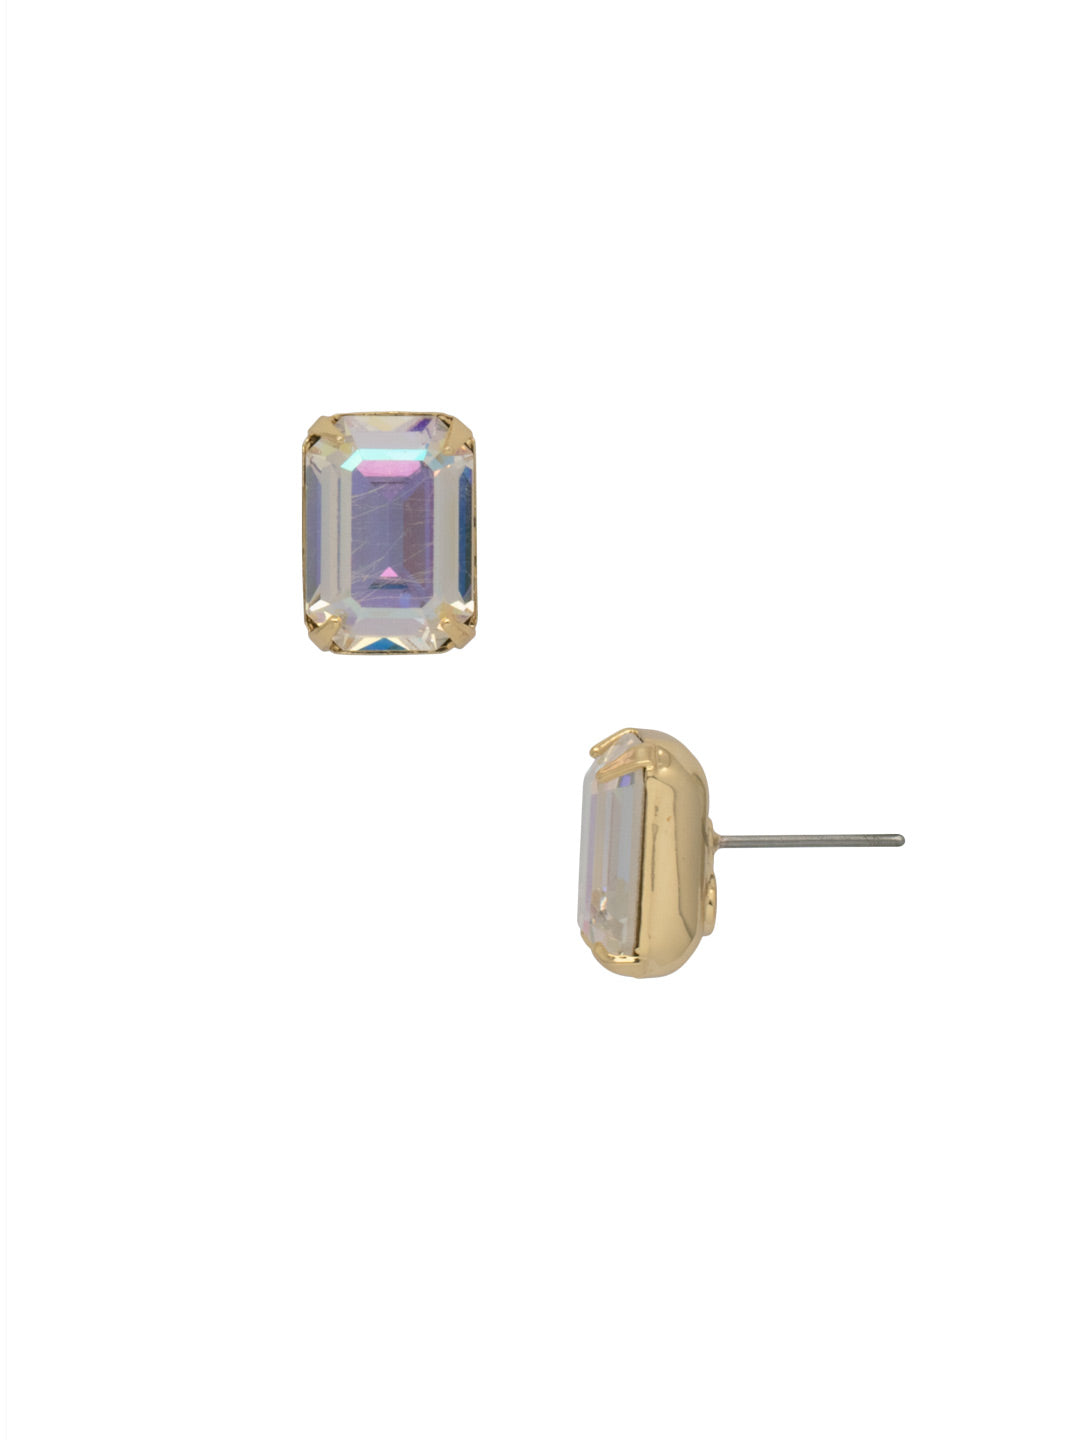 Everyday Stud Earrings - ECT11BGCAB - <p>Simple studs never go out of style! Try this single cut crystal on a post for everyday sparkle. From Sorrelli's Crystal Aurora Borealis collection in our Bright Gold-tone finish.</p>